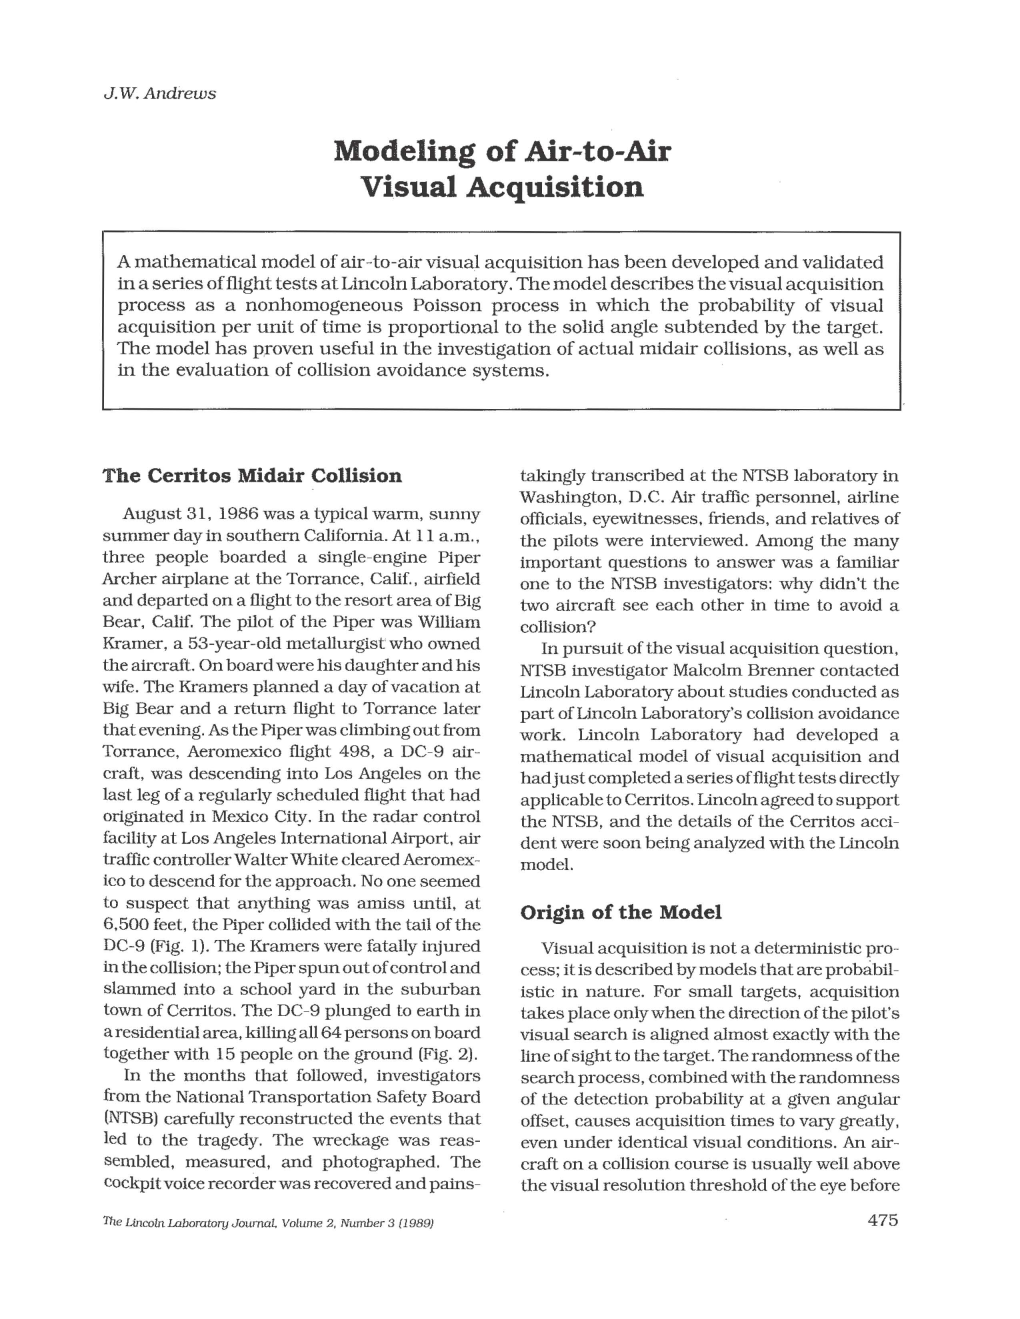 Modeling of Air-To-Air Visual Acquisition